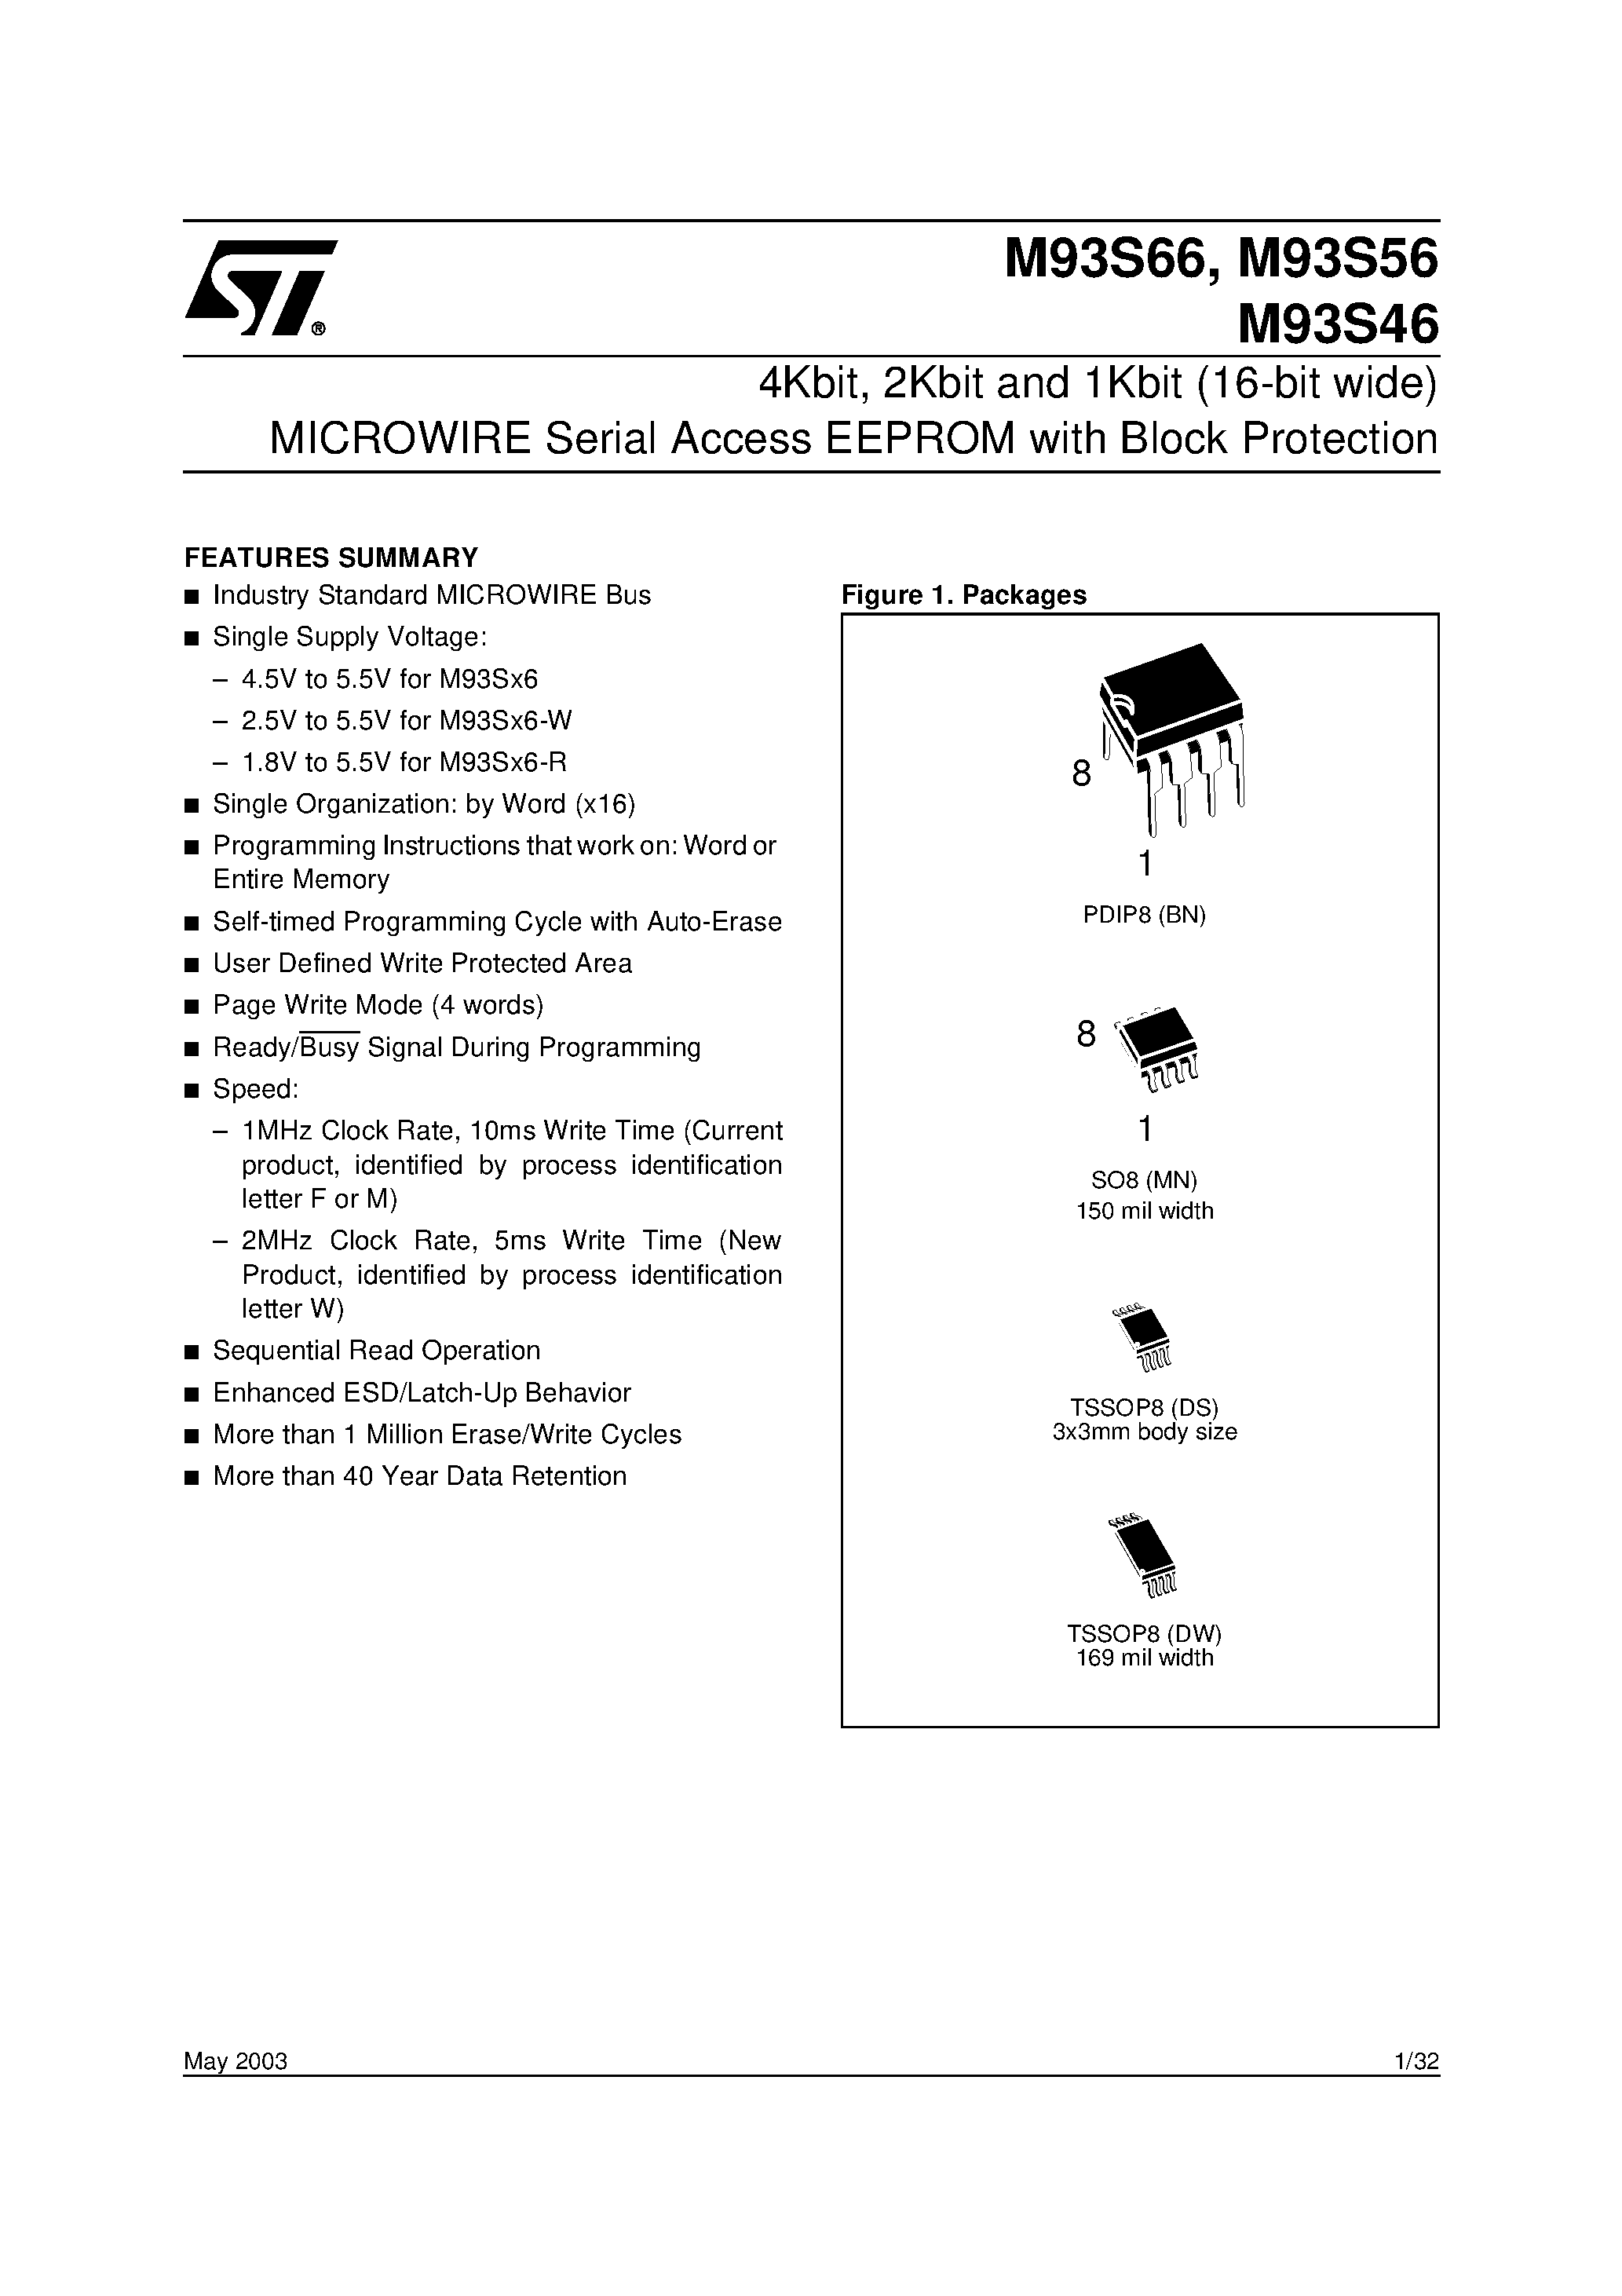 Datasheet M93S46 - 4Kbit / 2Kbit and 1Kbit 16-bit wide MICROWIRE Serial Access EEPROM with Block Protection page 1